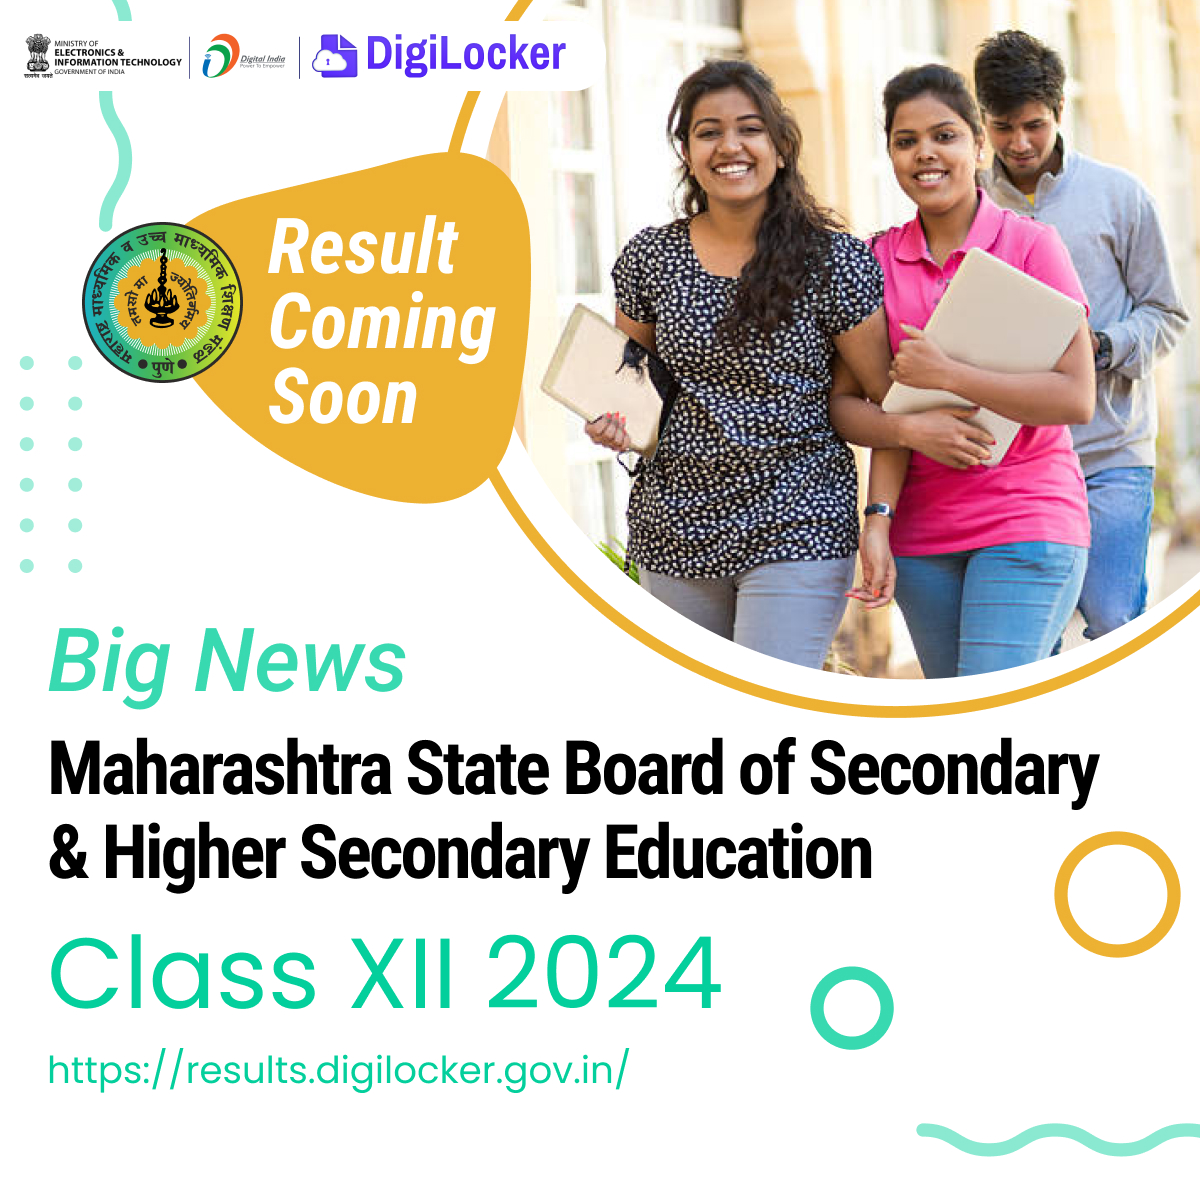 Exciting updates for Maharashtra State Board of Secondary & Higher Secondary Education, Class XII 2024 students! Your results #comingsoon on results.digilocker.gov.in Stay tuned for the latest announcements! #Maharashtraboard #classxii #Result2024